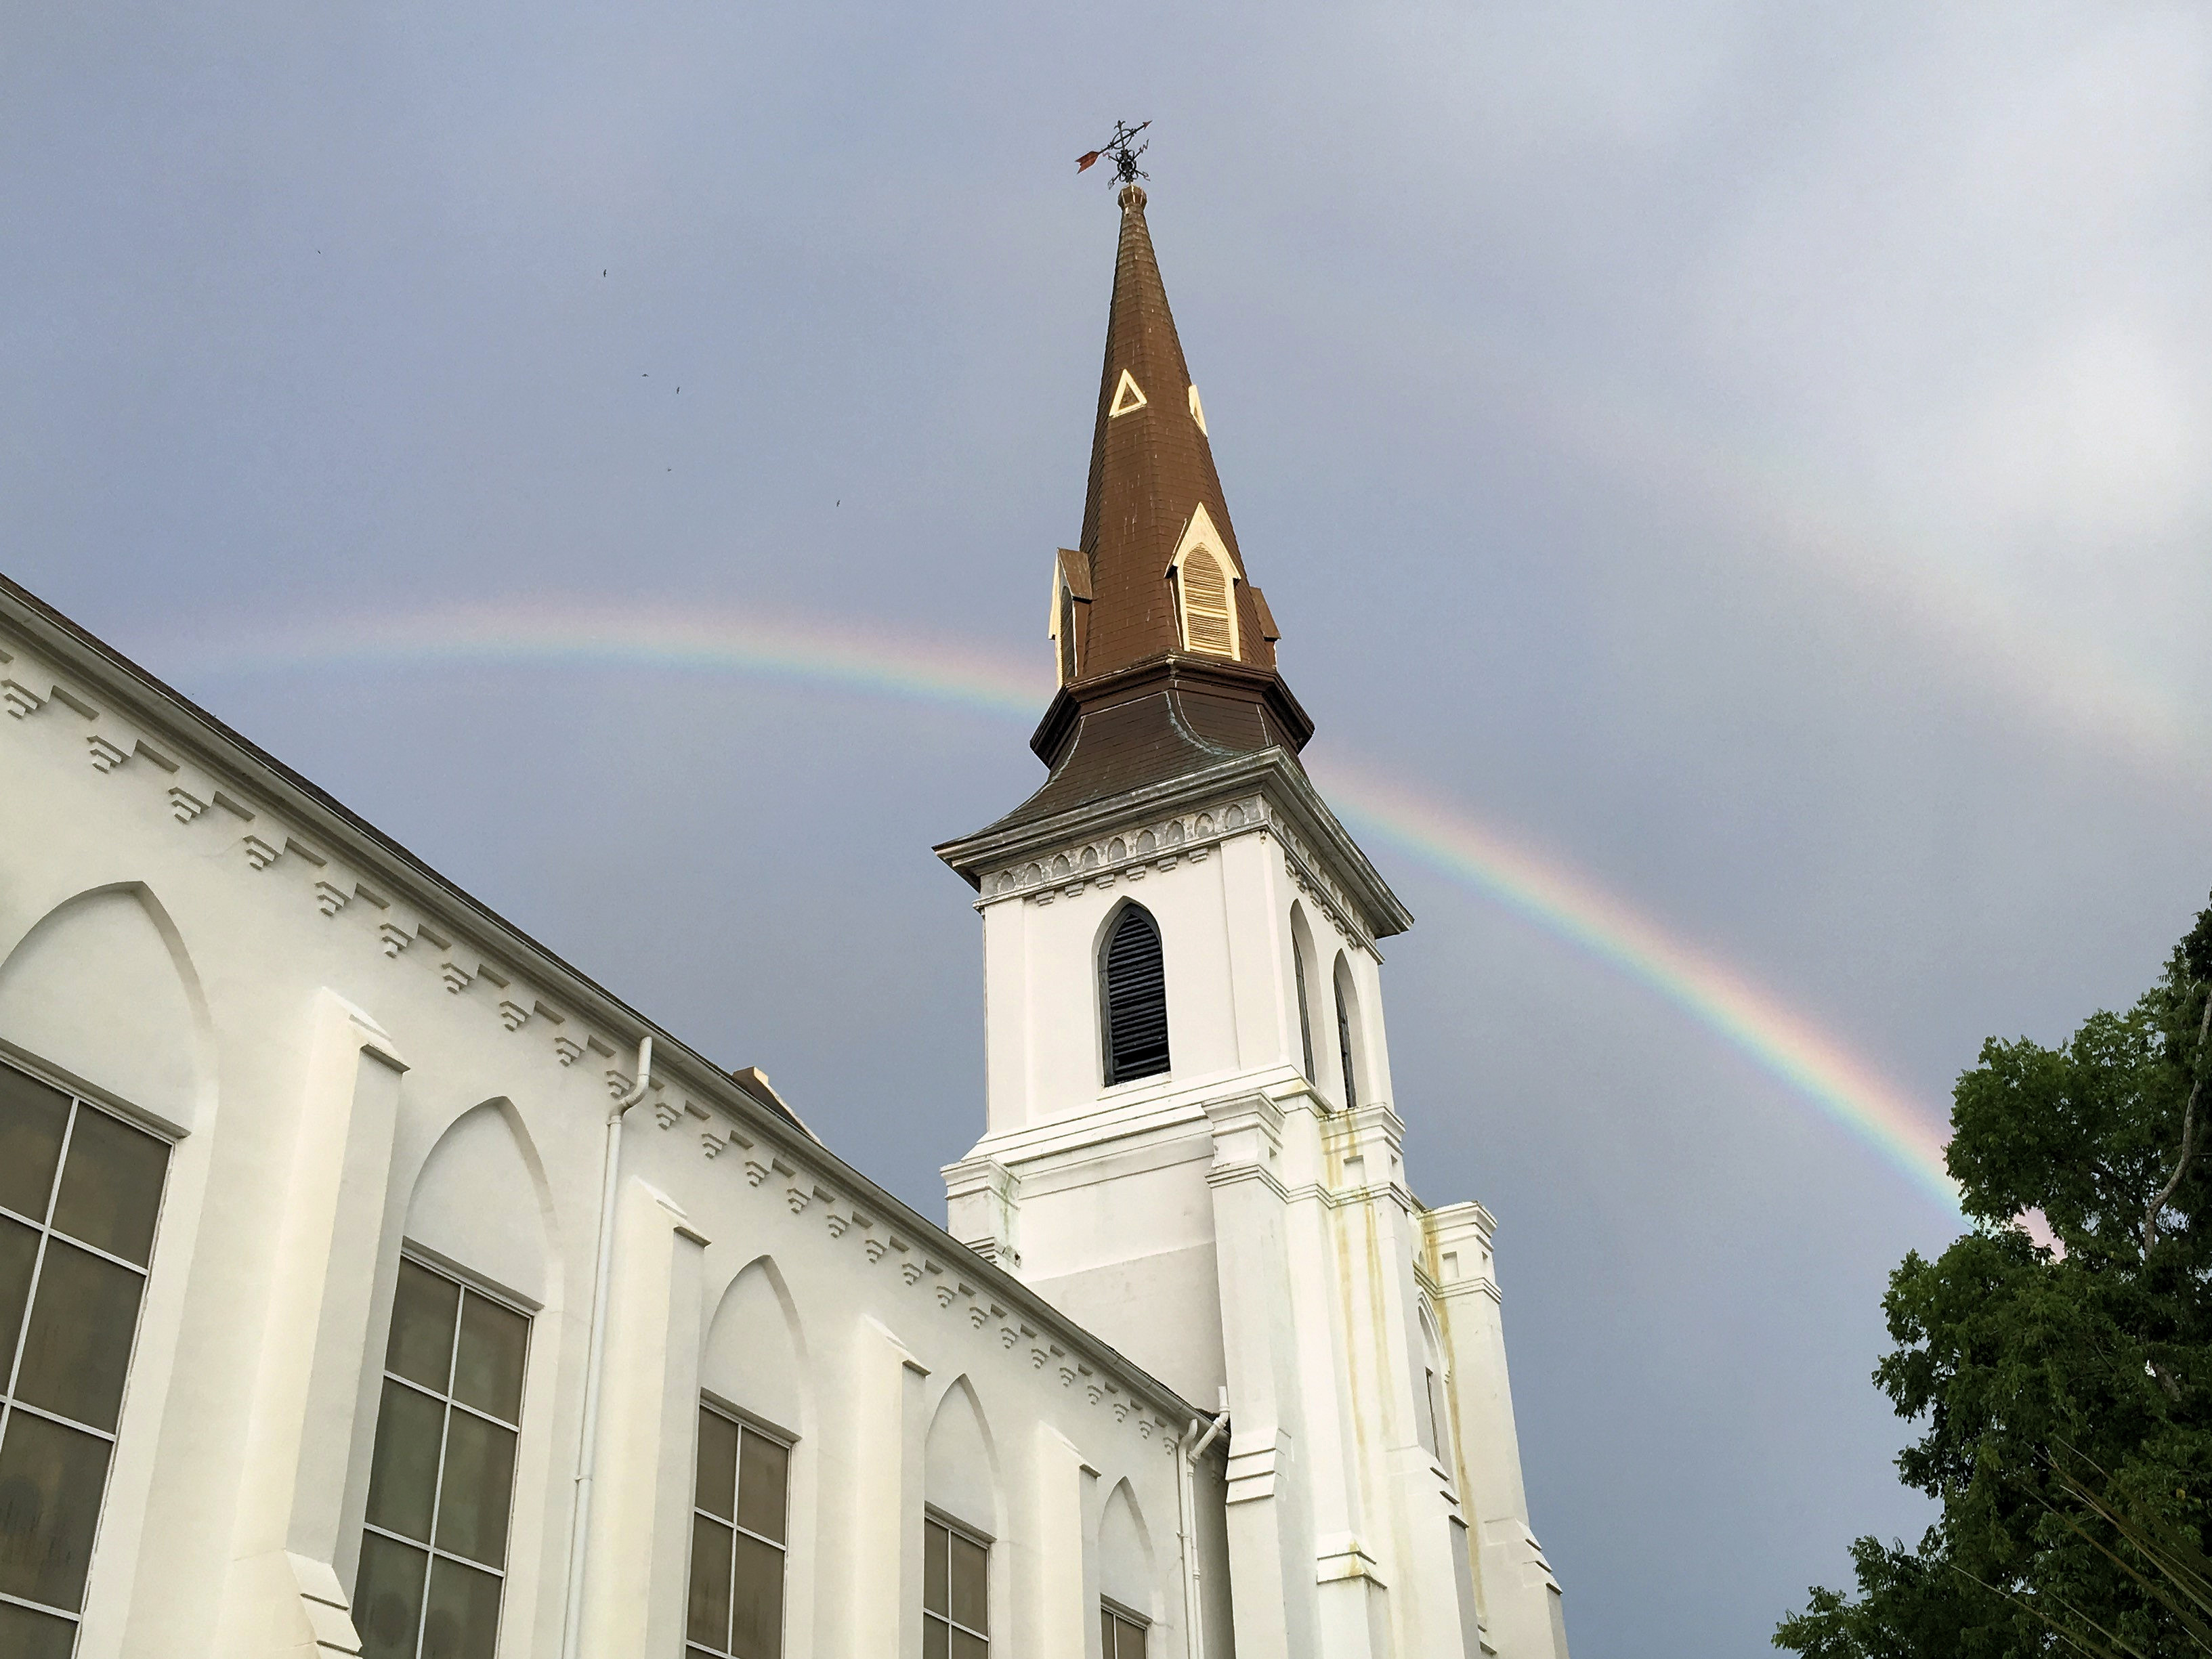 Photograph of the spire of the Mother Emanuel Church spire with a rainbow in the dark sky behind, taken at the memorial for victims of the mass shooting which occurred there. 